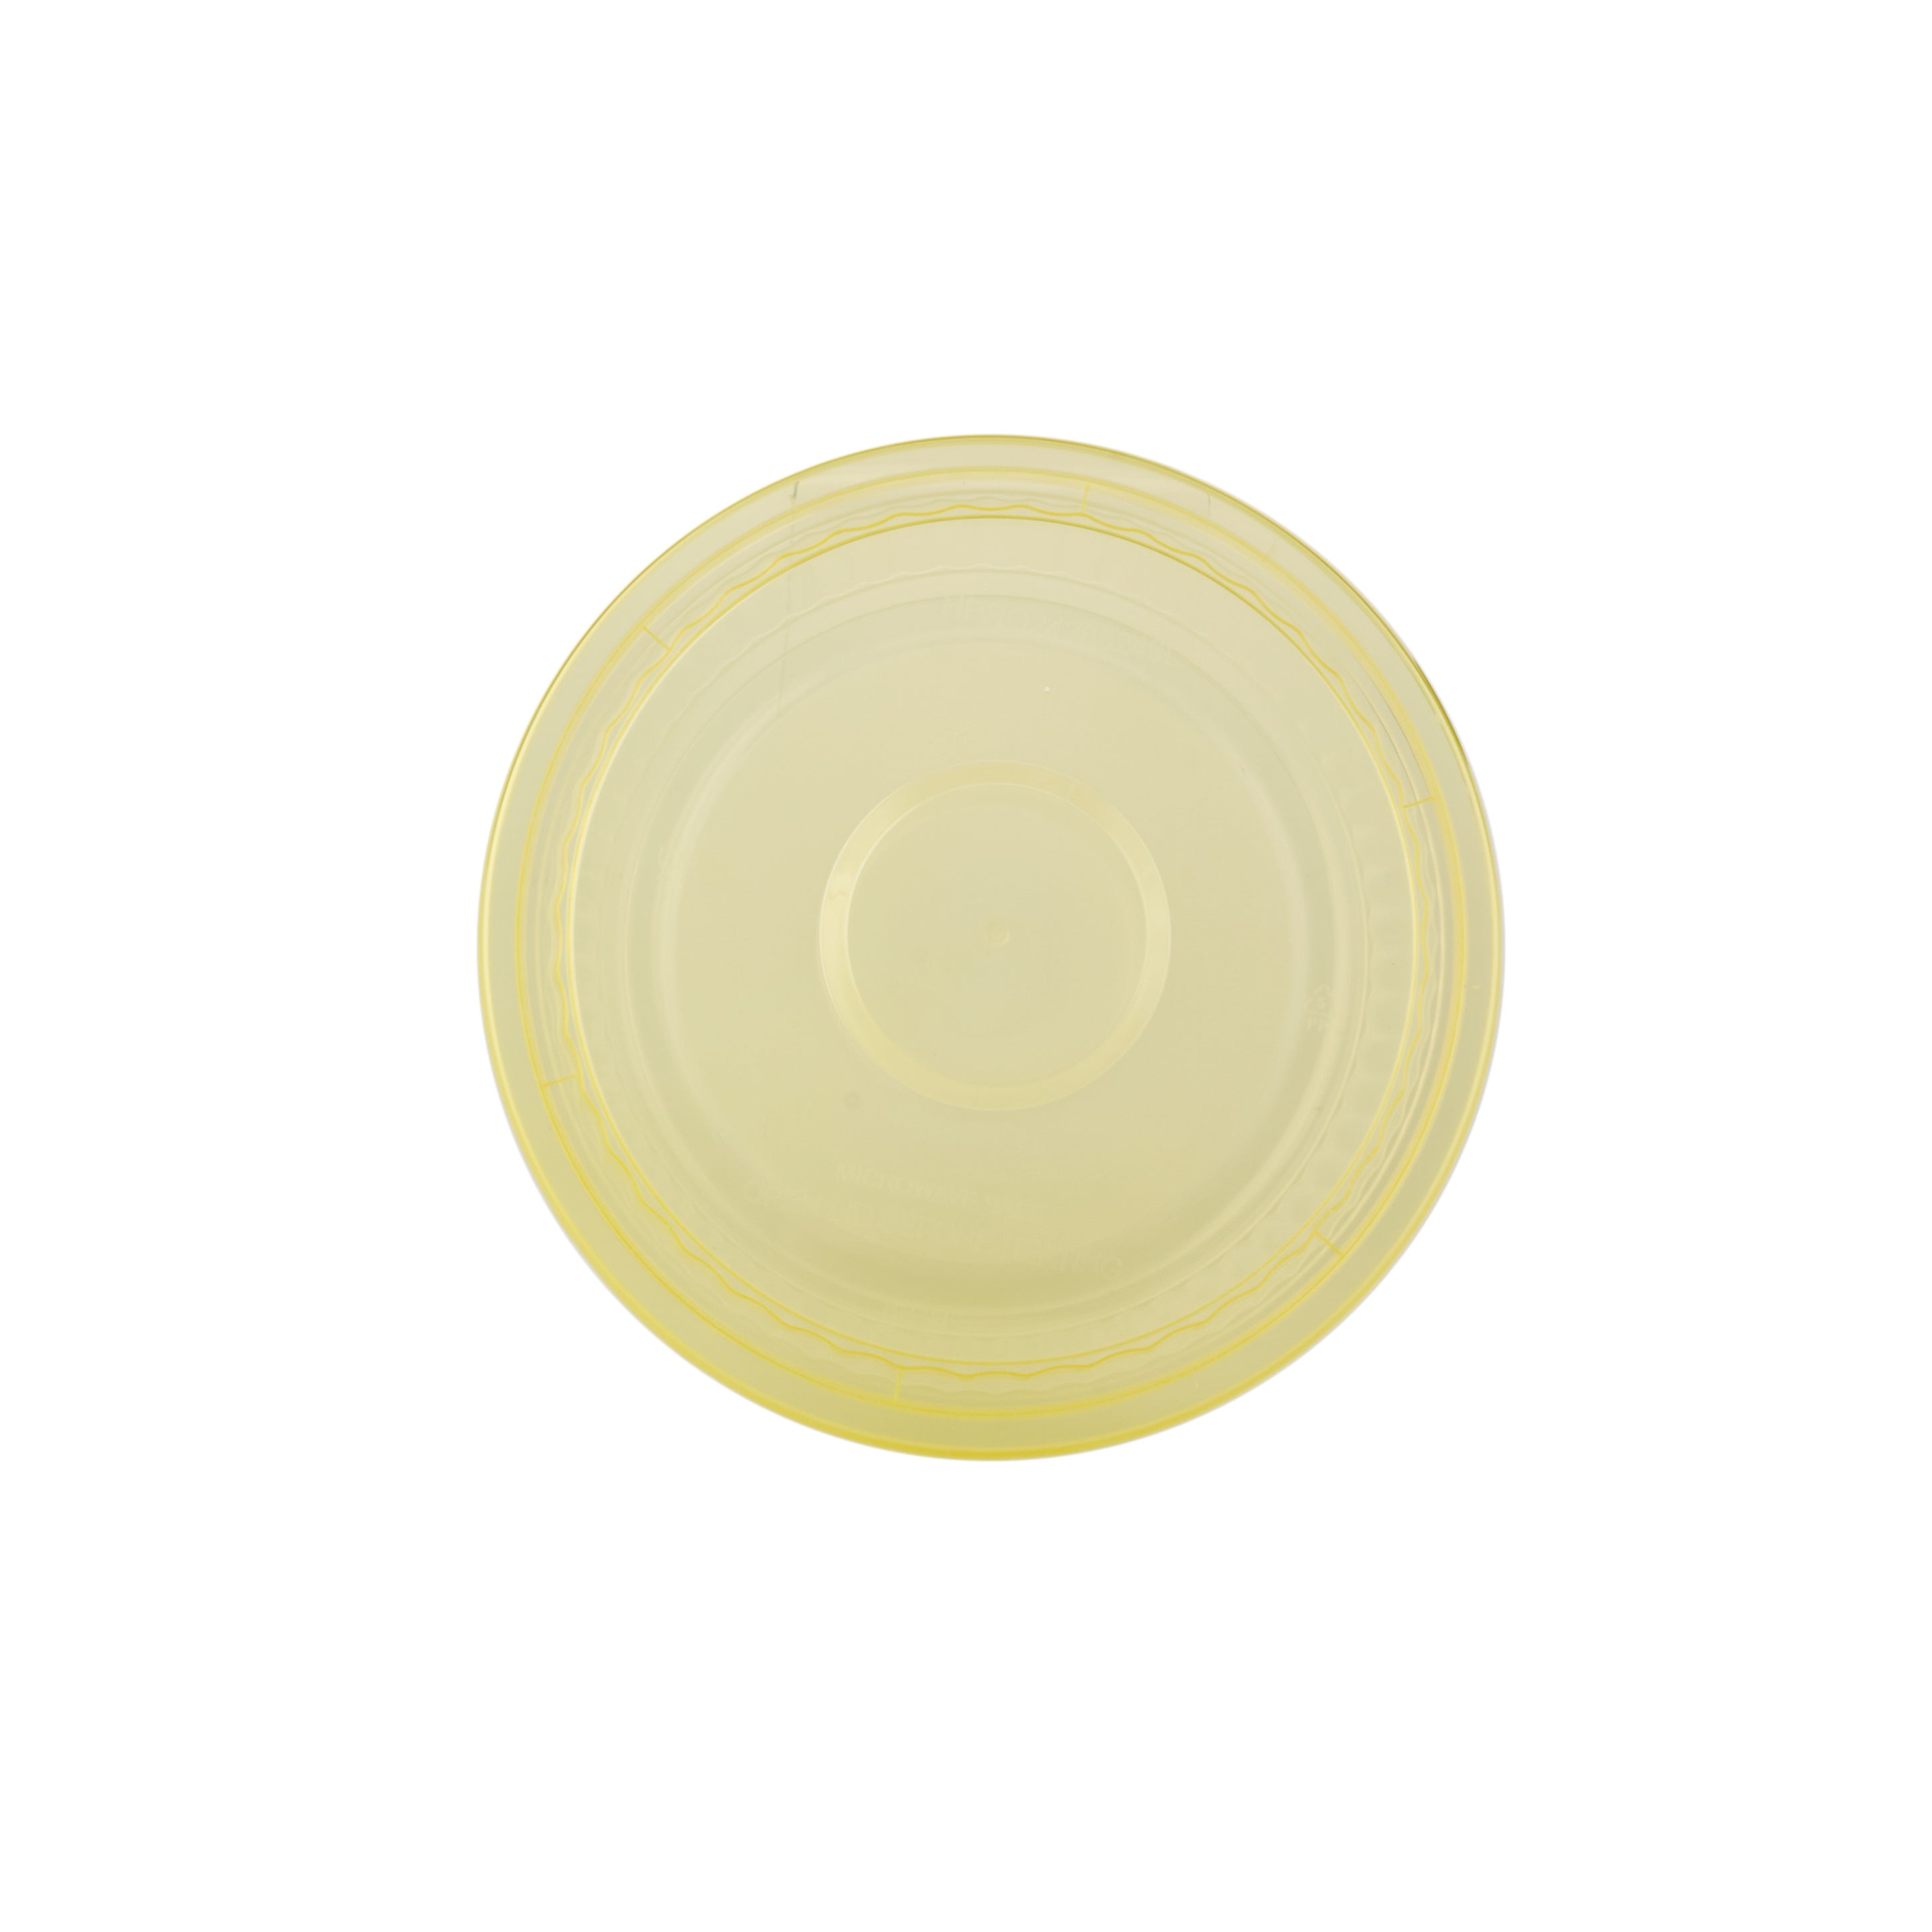 Clear Microwavable Round Container with color Lids